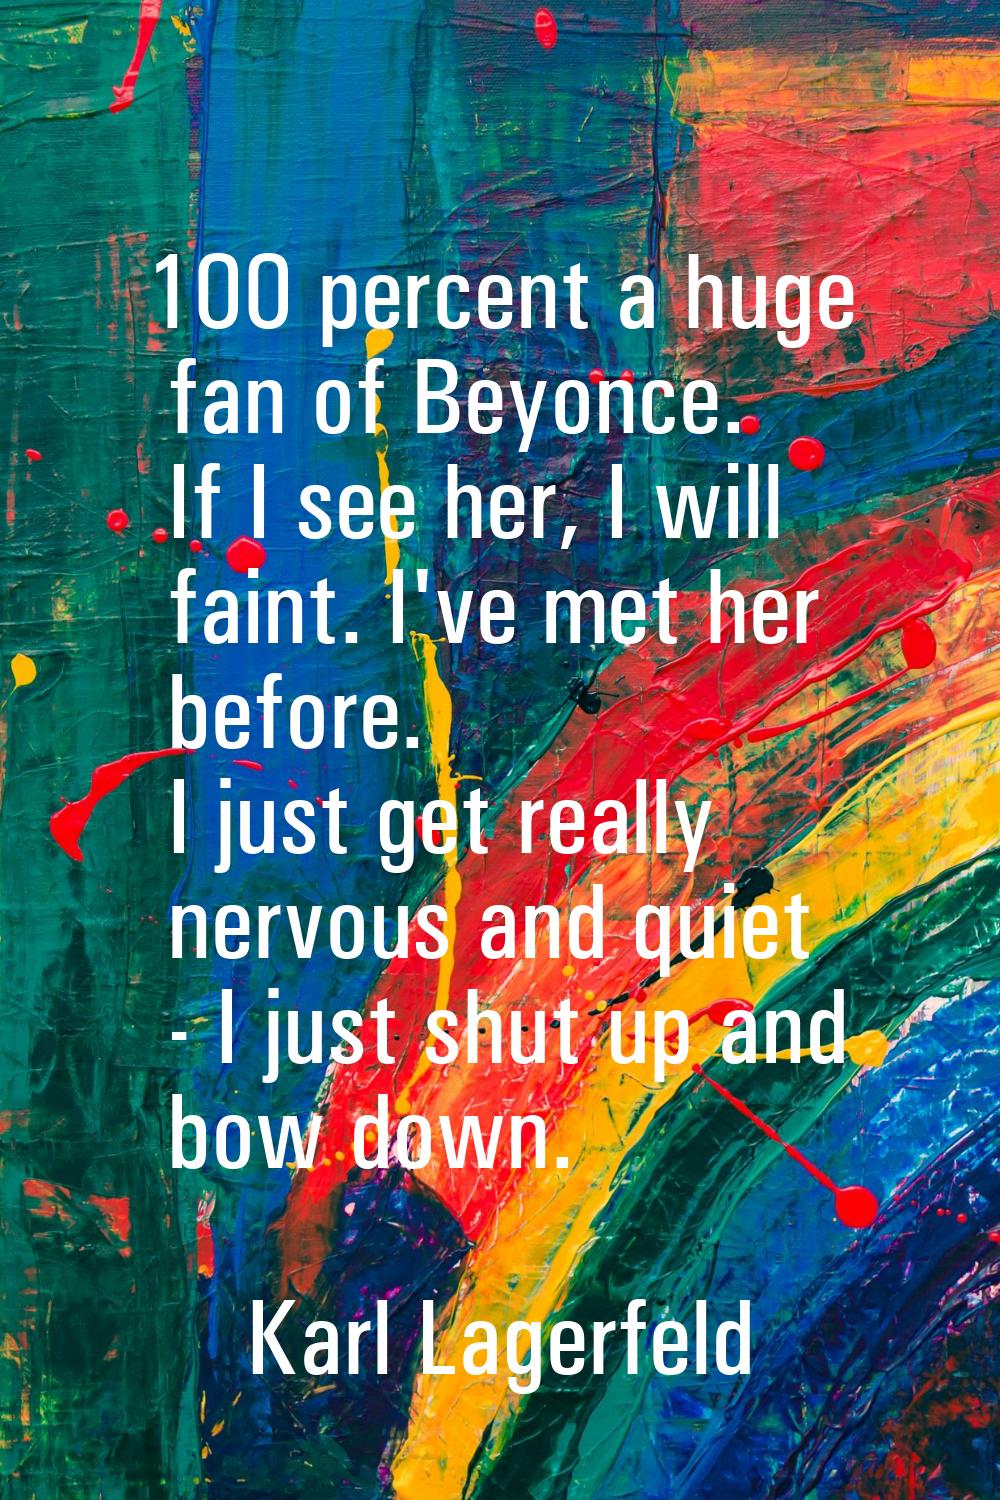 100 percent a huge fan of Beyonce. If I see her, I will faint. I've met her before. I just get real